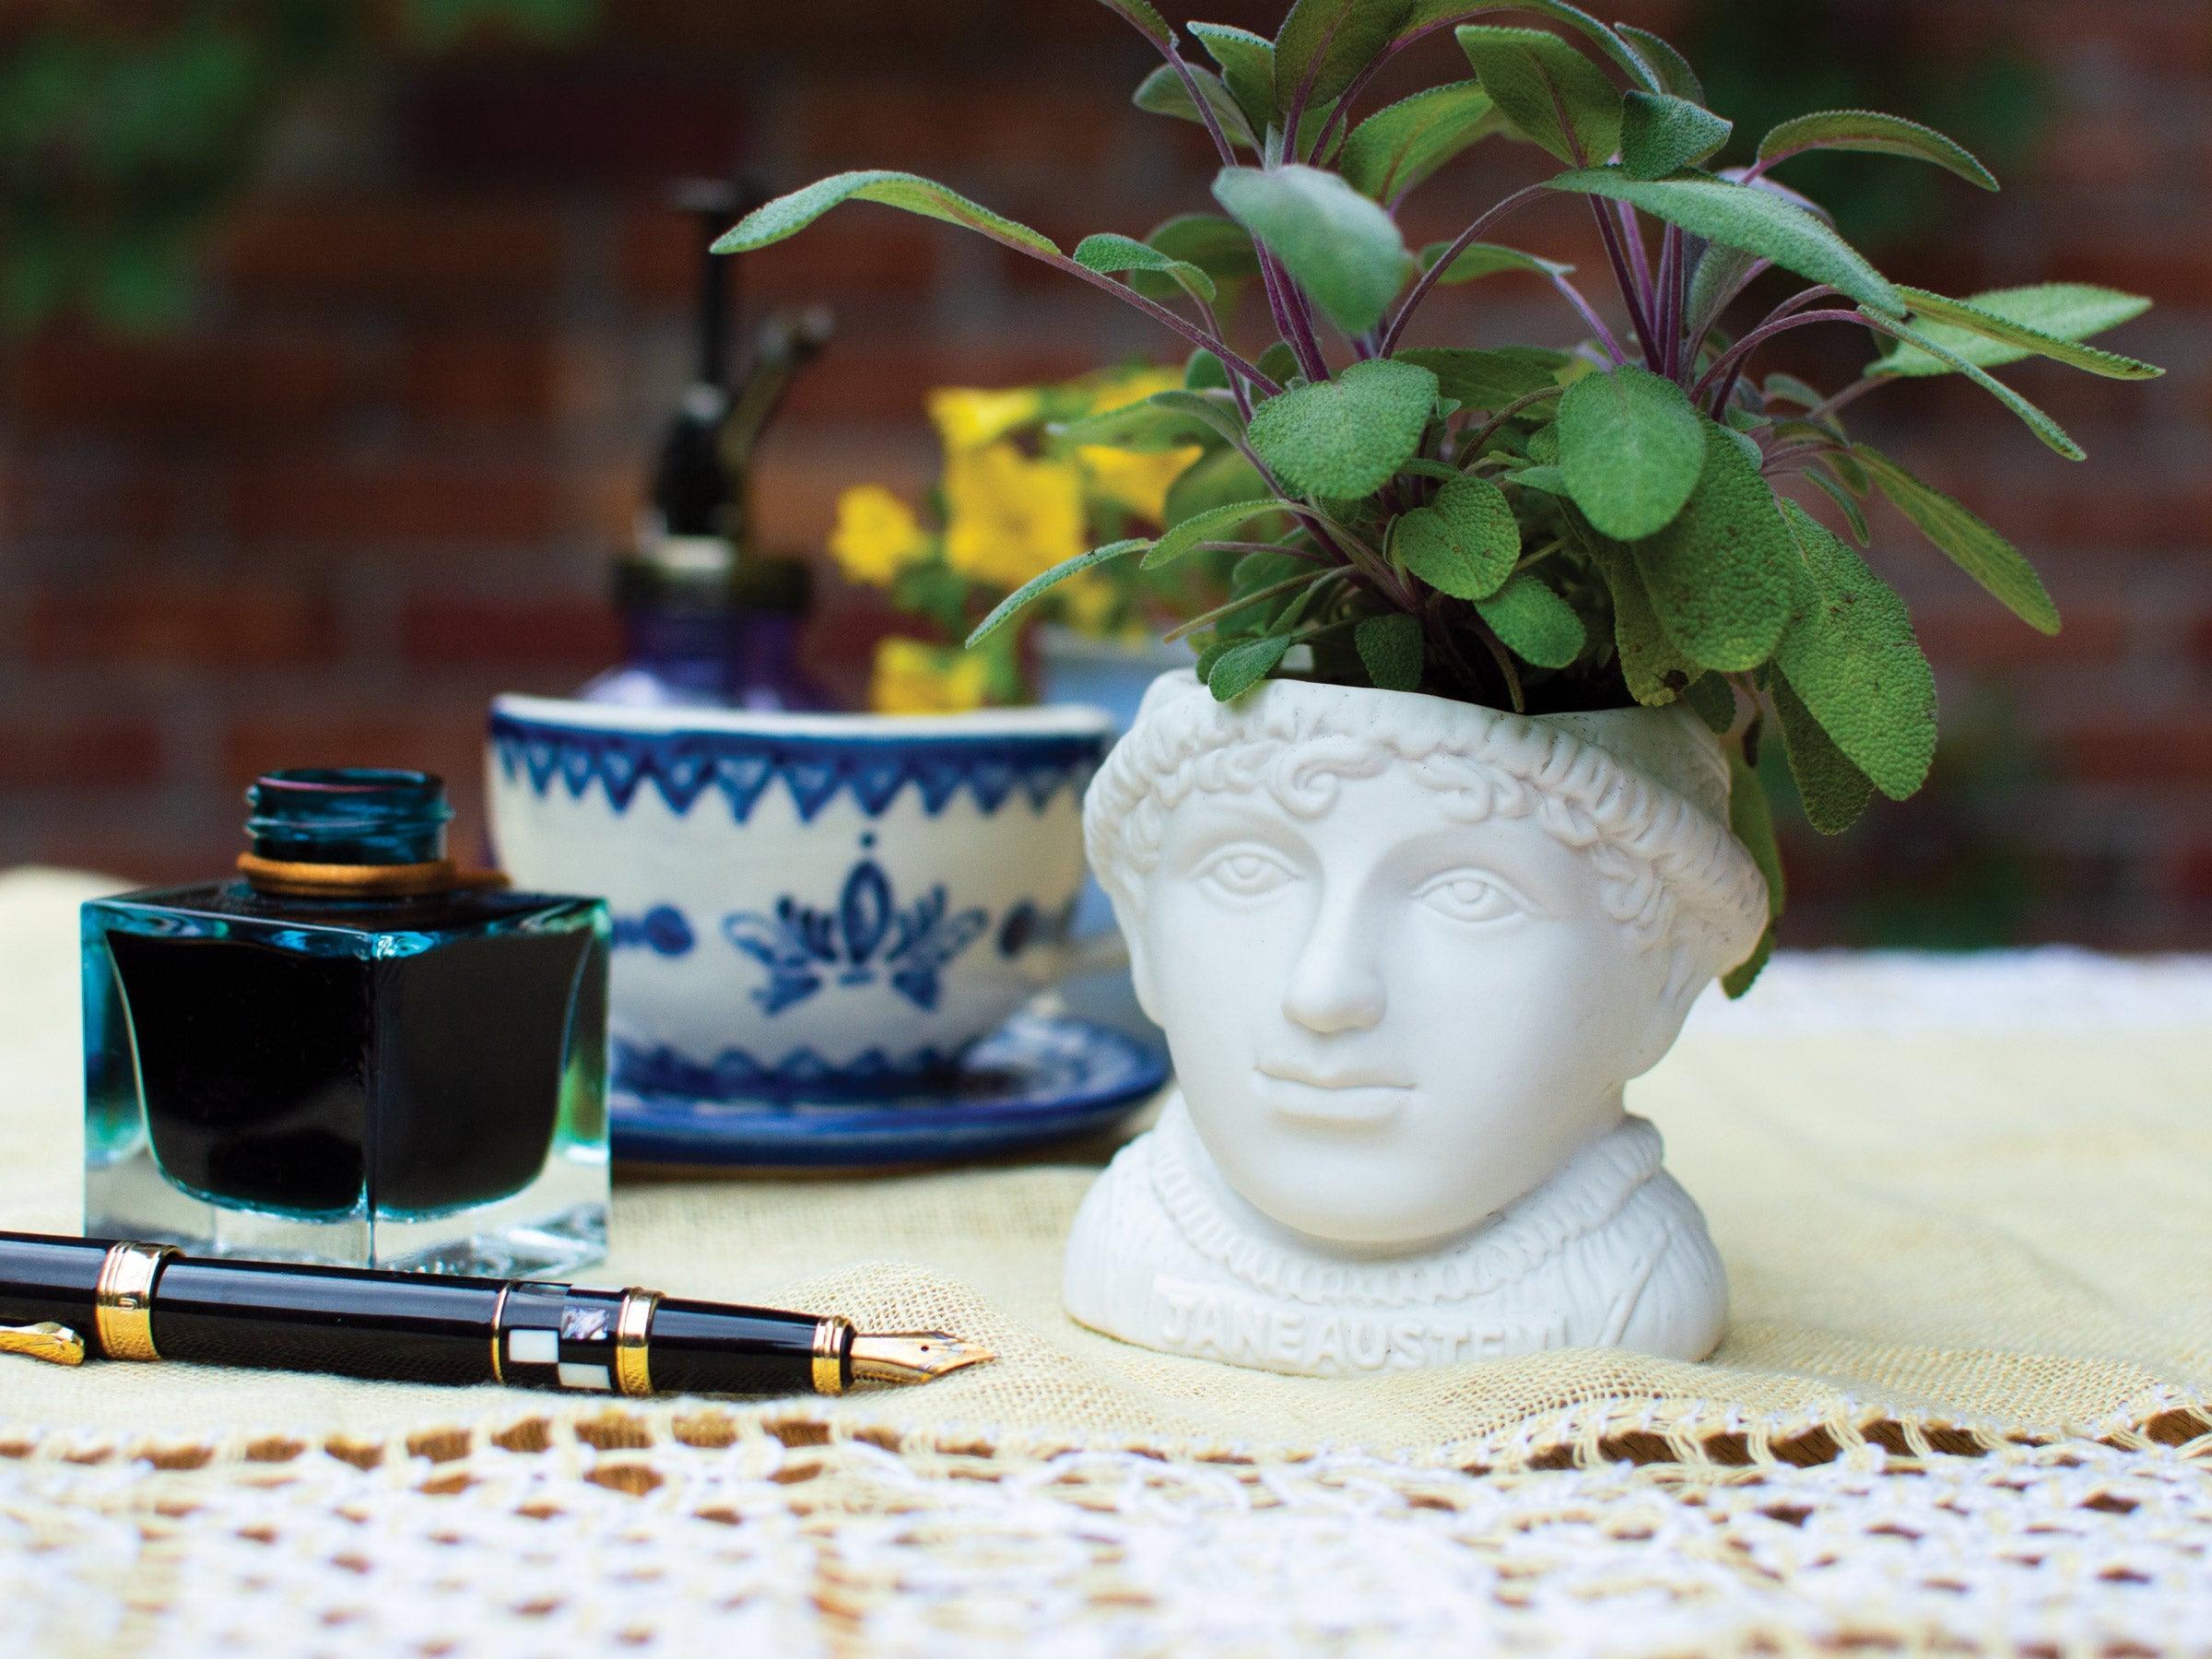 Product photo of Jane Austen Bust Planter, a novelty gift manufactured by The Unemployed Philosophers Guild.